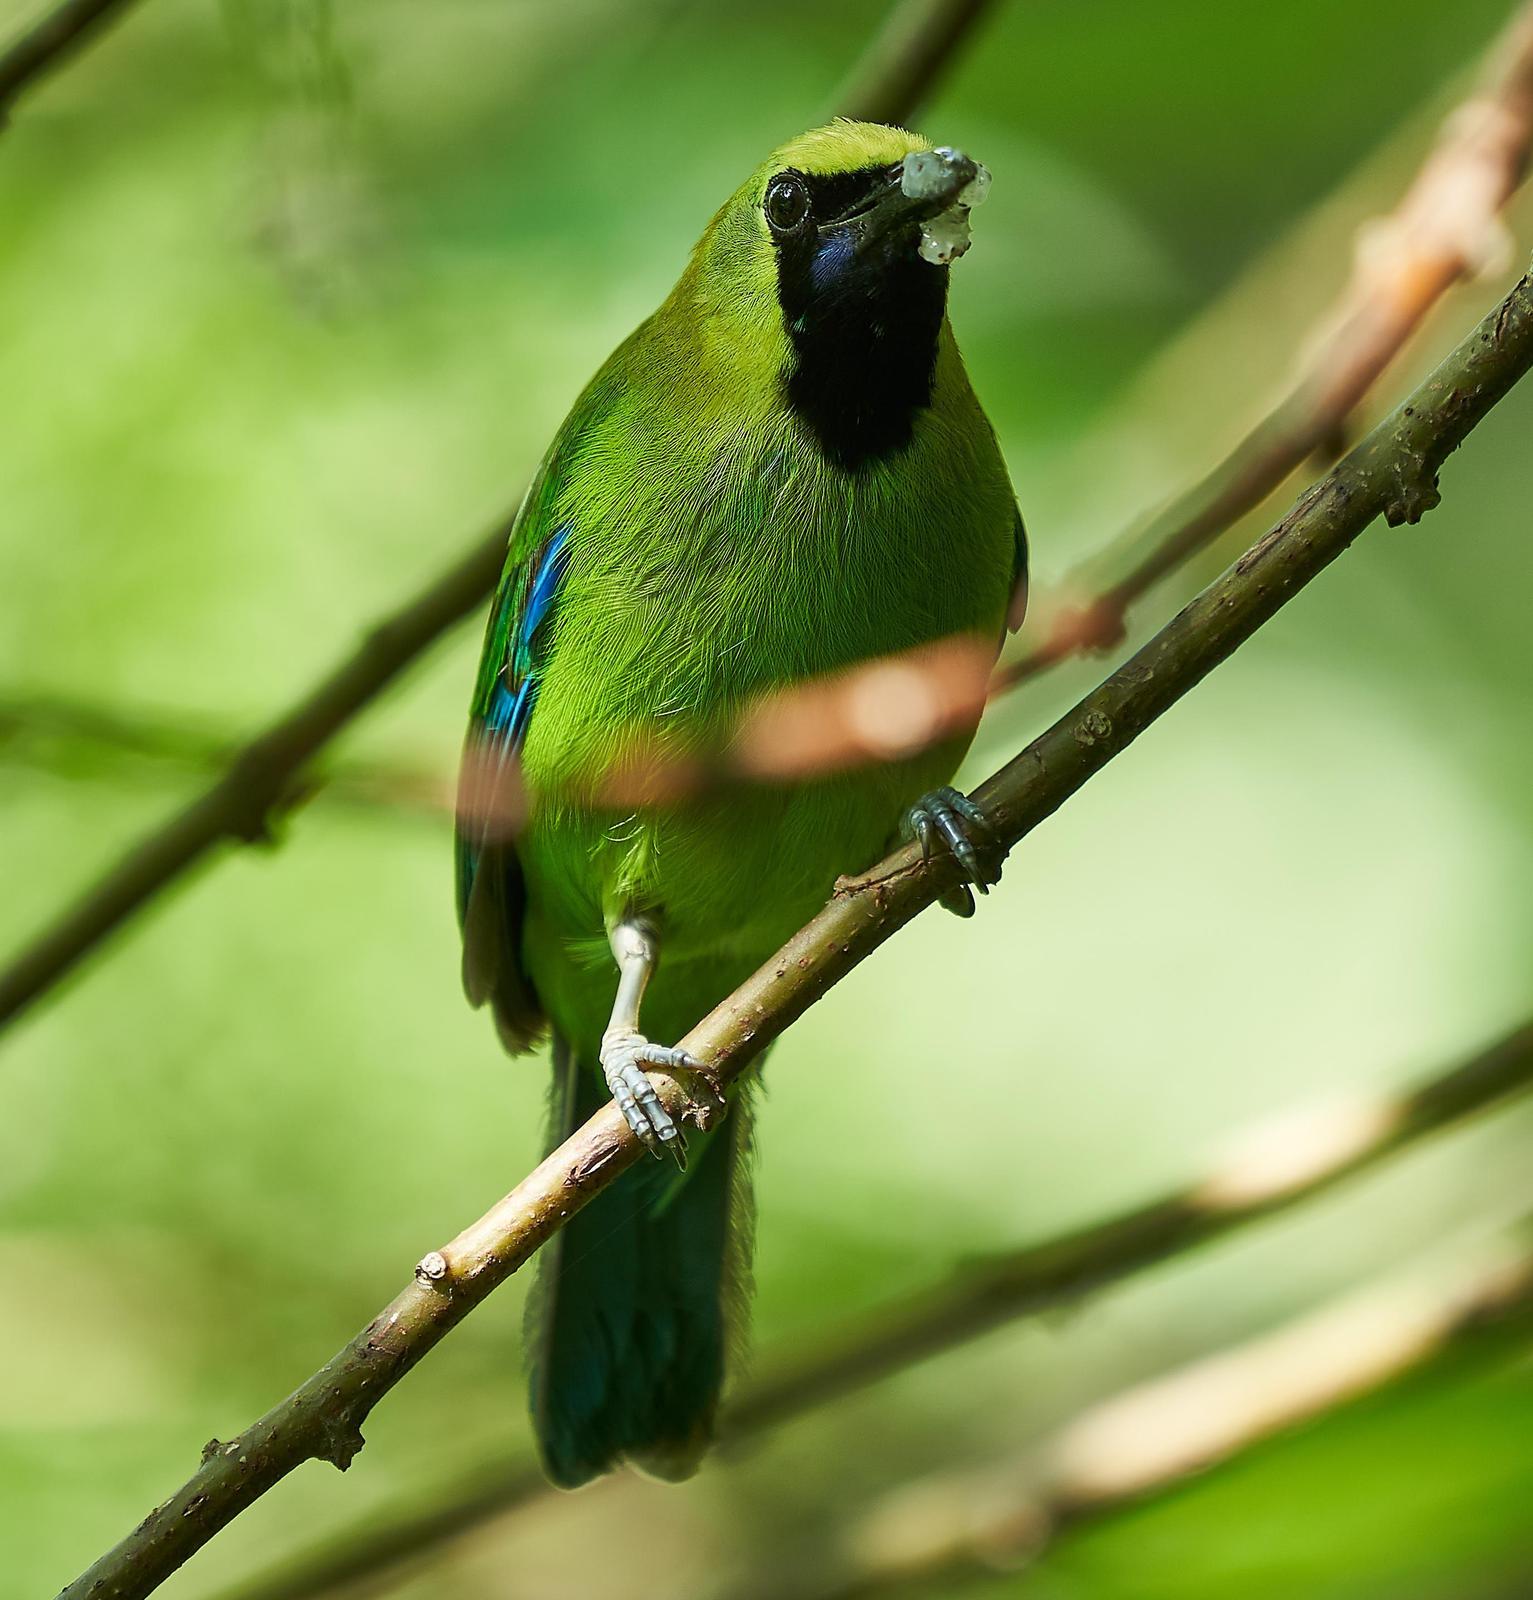 Blue-winged Leafbird Photo by Steven Cheong